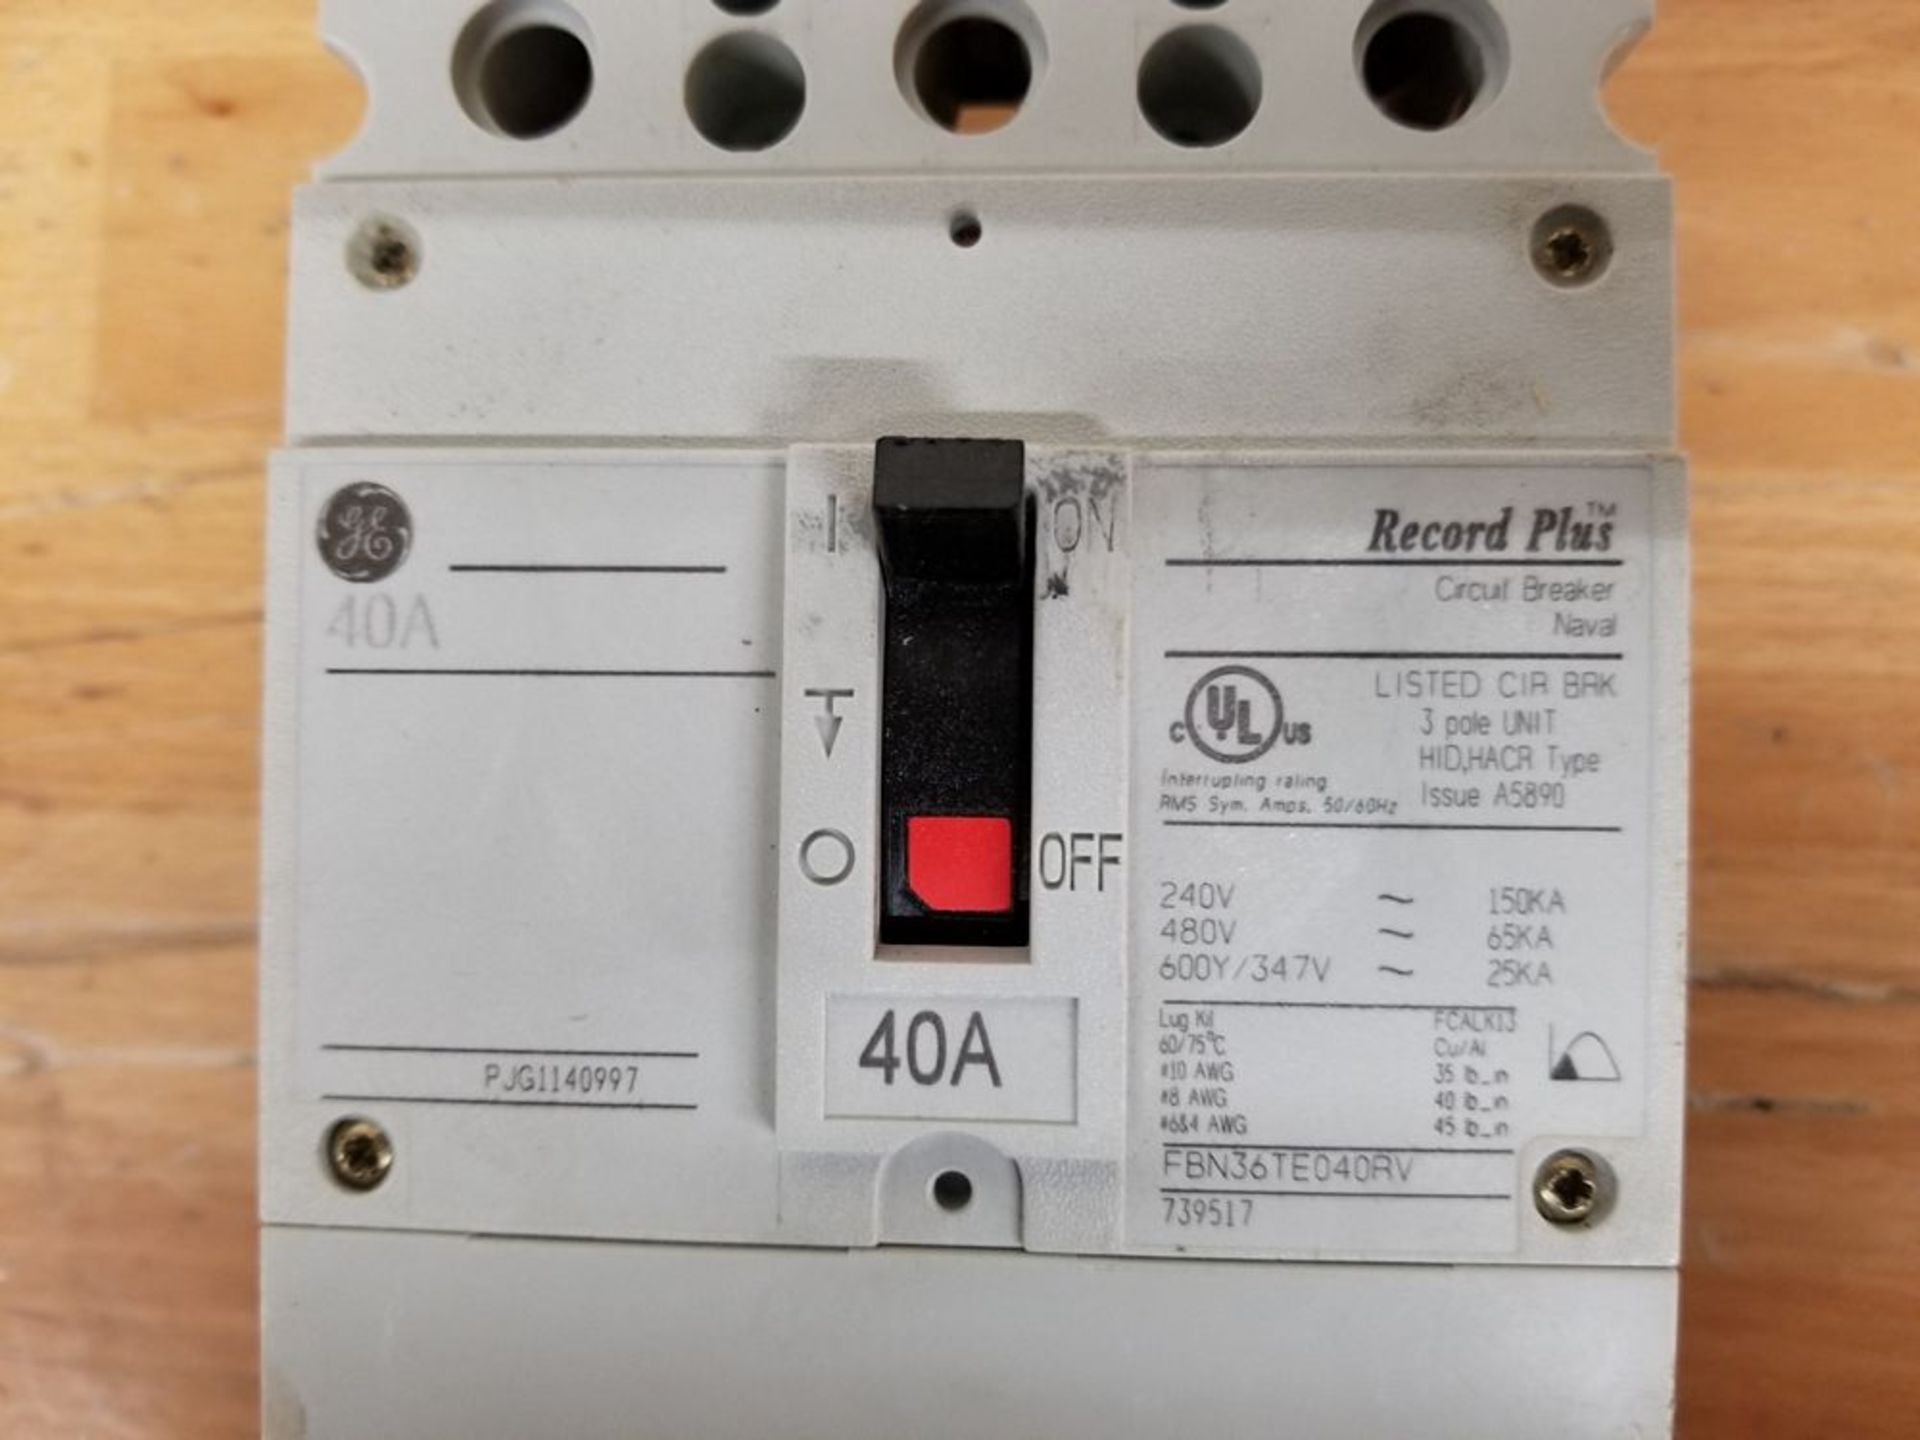 GE RECORD PLUS 40A MOLDED CASE CIRCUIT BREAKER - Image 3 of 7